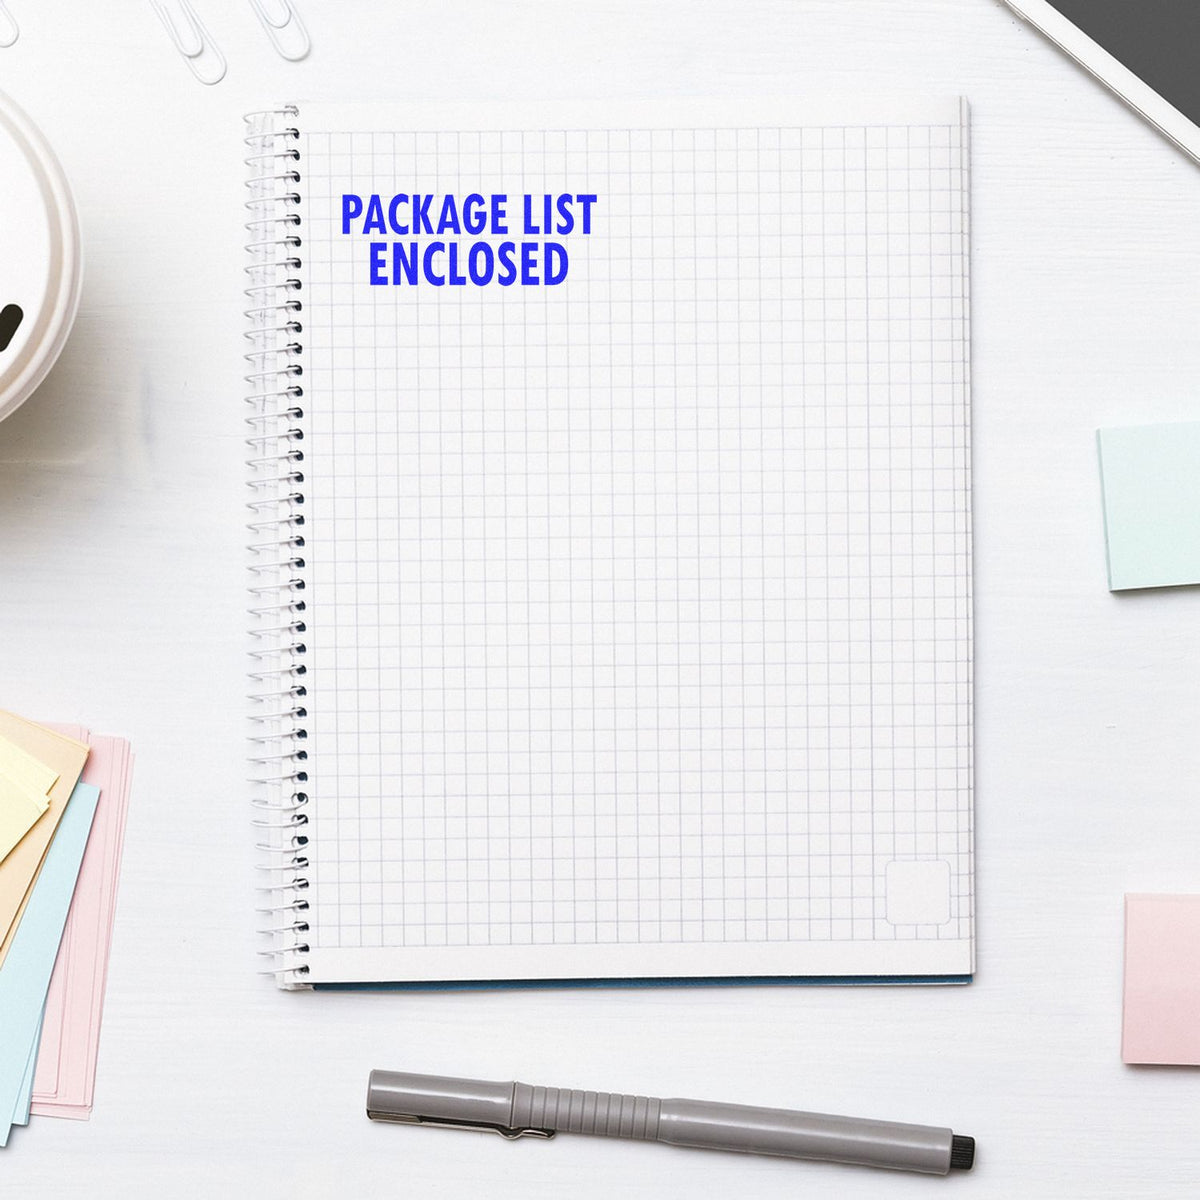 Large Package List Enclosed Rubber Stamp In Use Photo